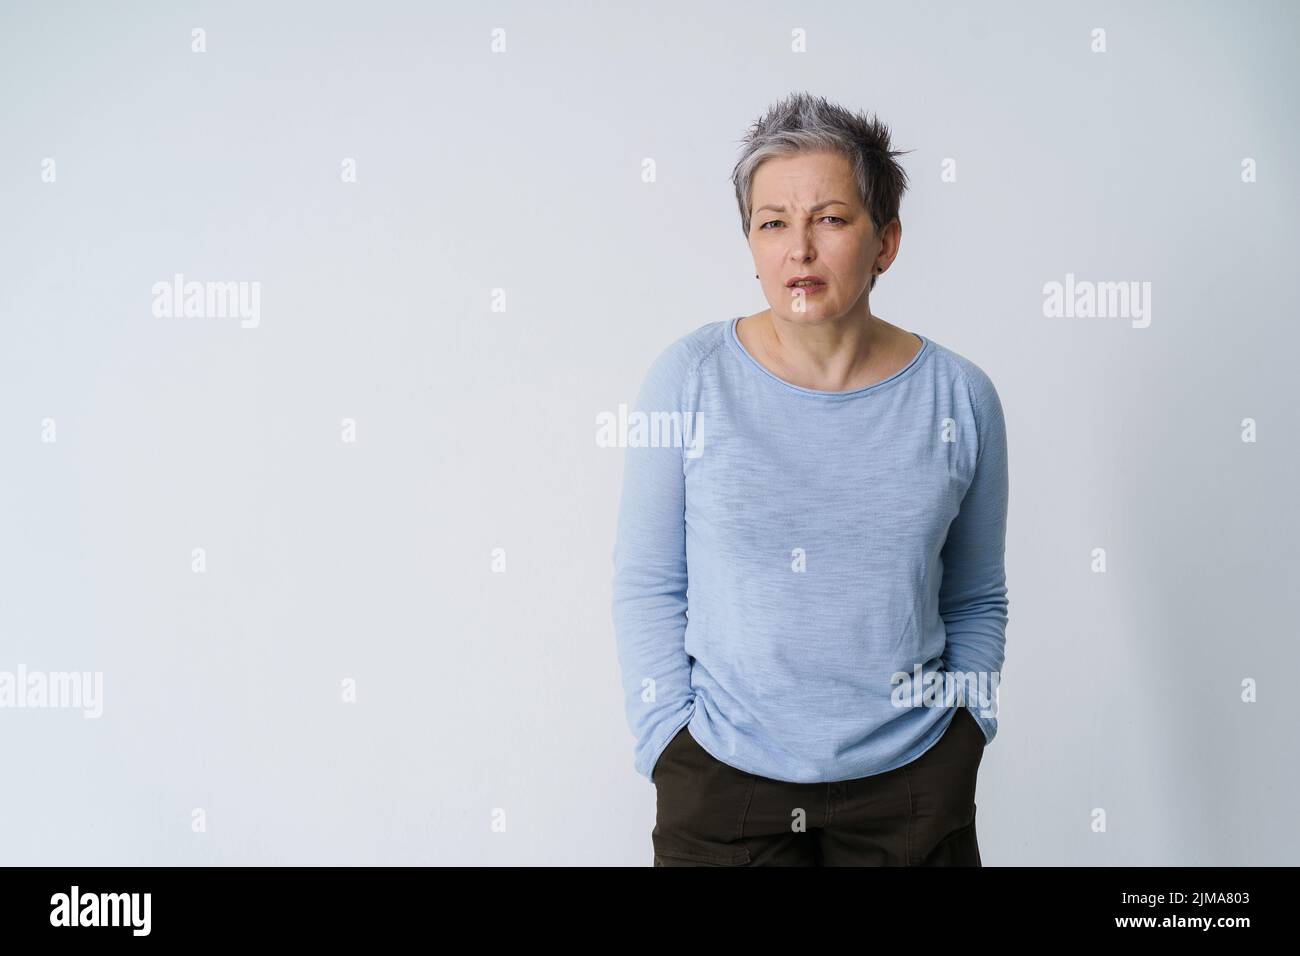 Stressed, angry mature grey haired woman 50s posing frustrated looking at camera with hands in pockets, copy space on left isolated on white background. Mature people healthcare.  Stock Photo